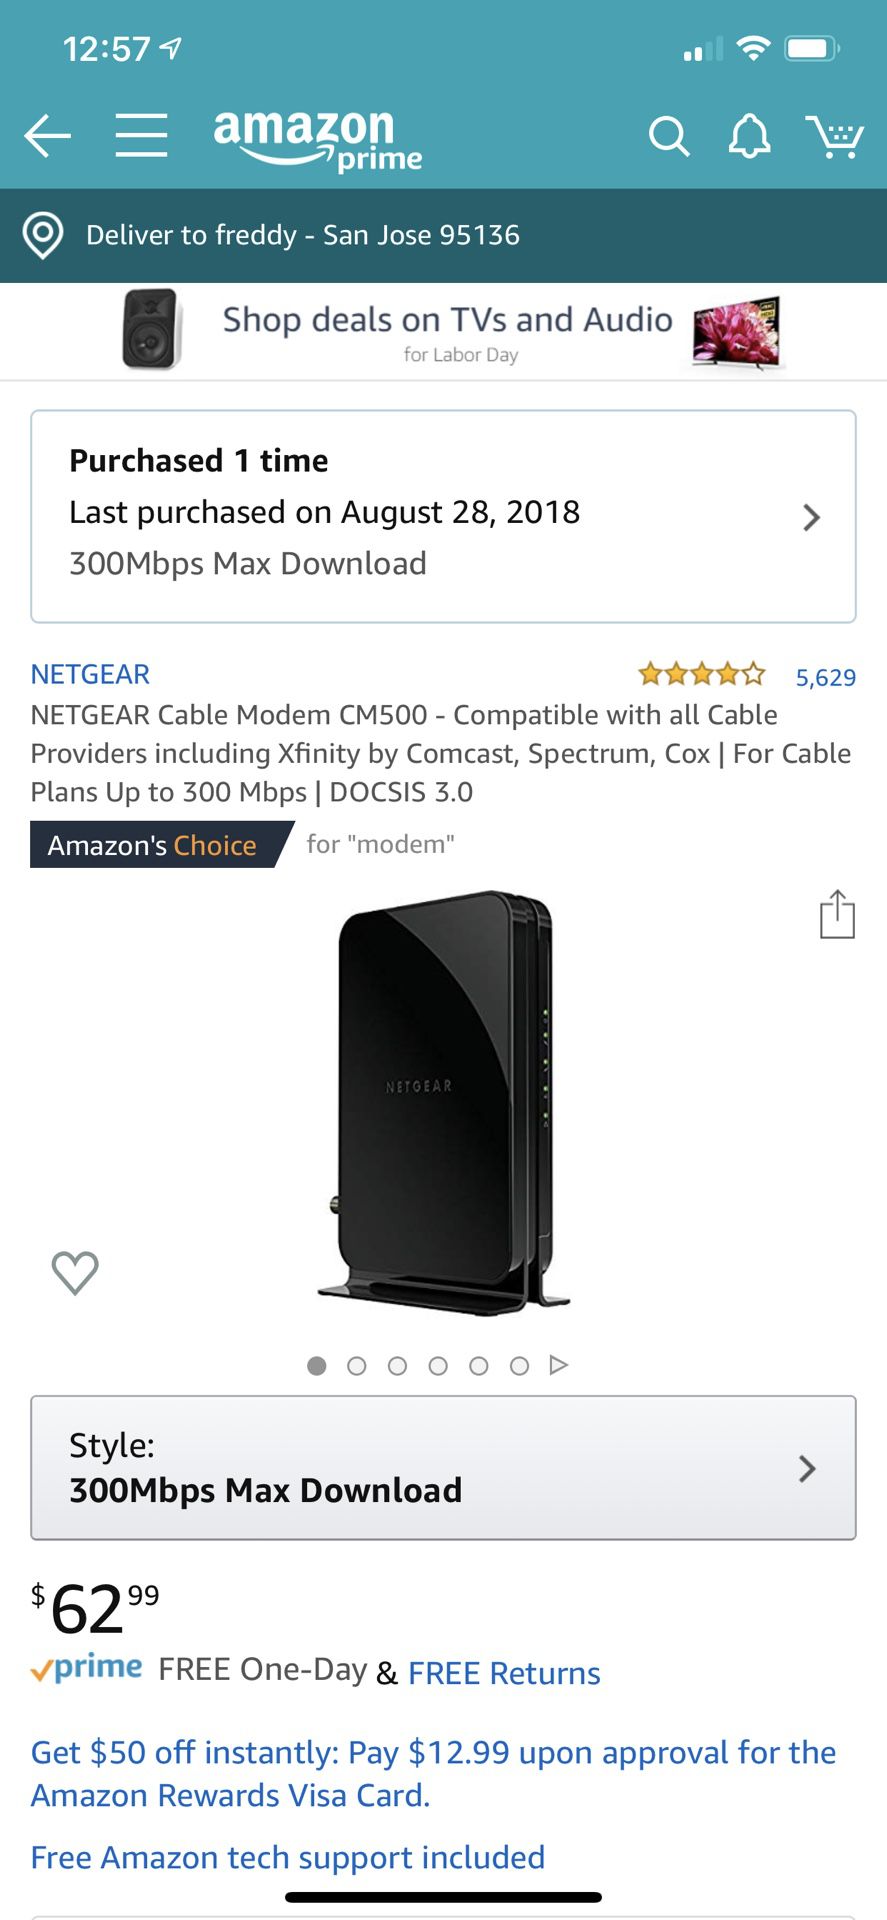 Cable modem compatible with Comcast Xfinity